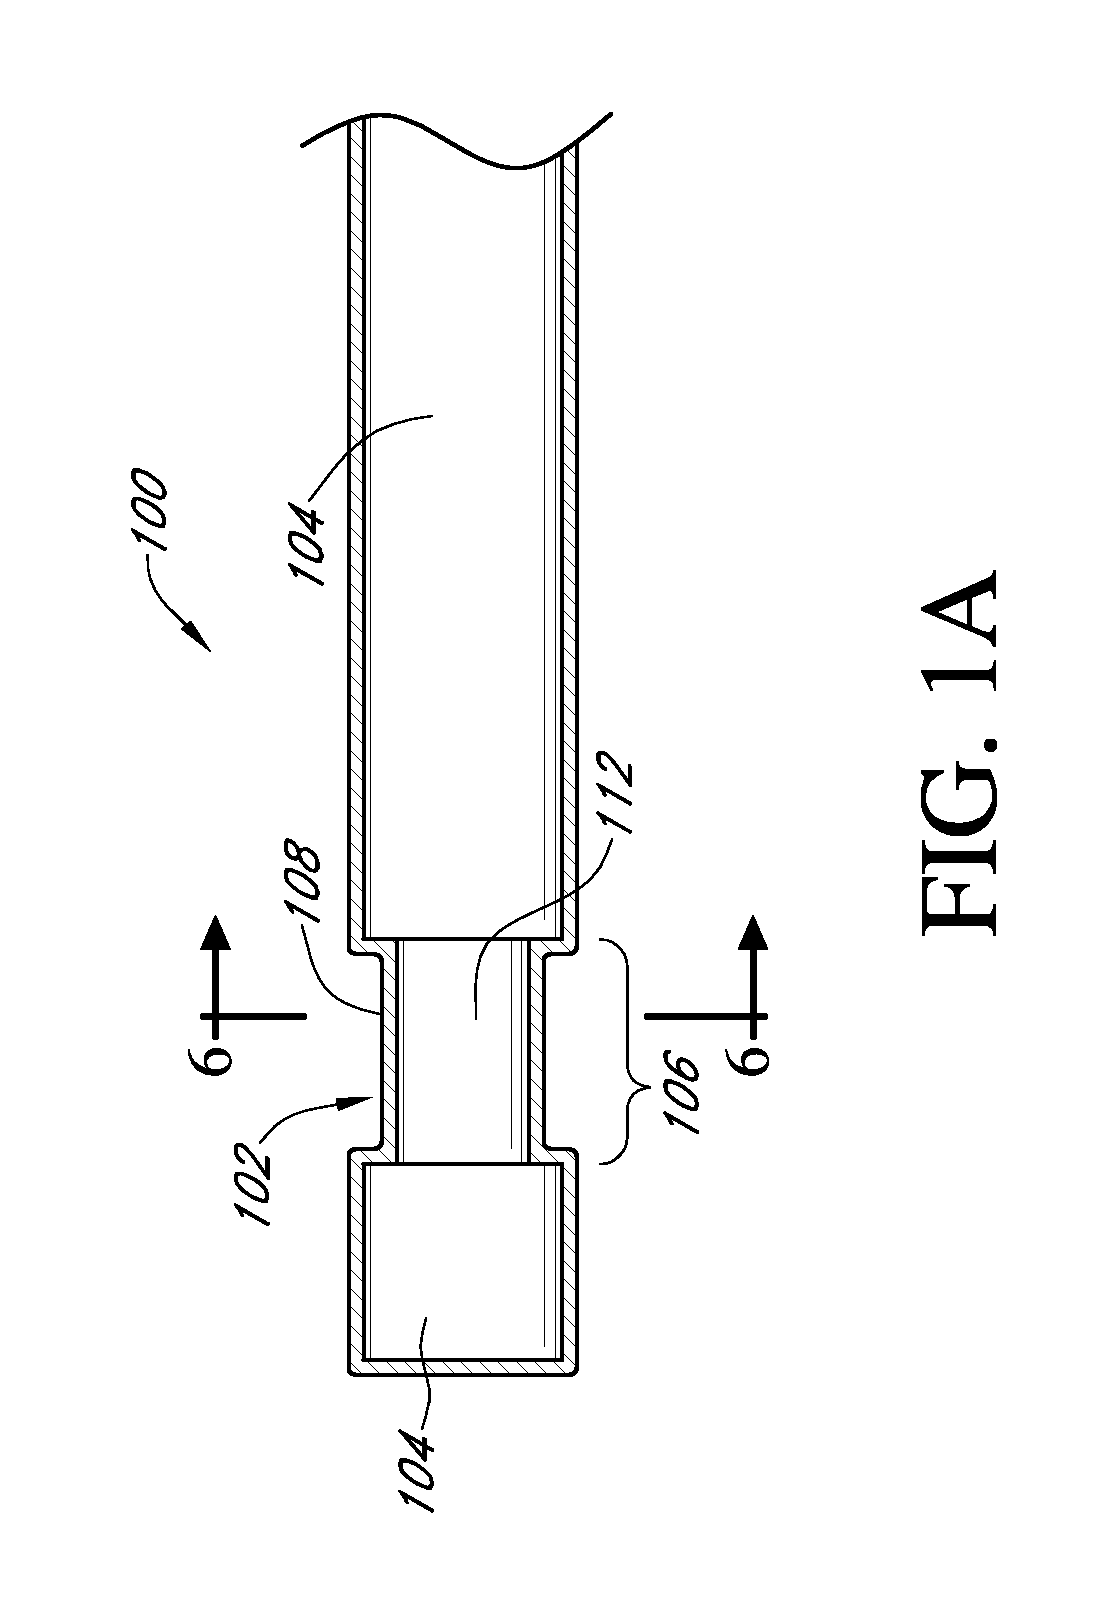 Analyte sensor with increased reference capacity